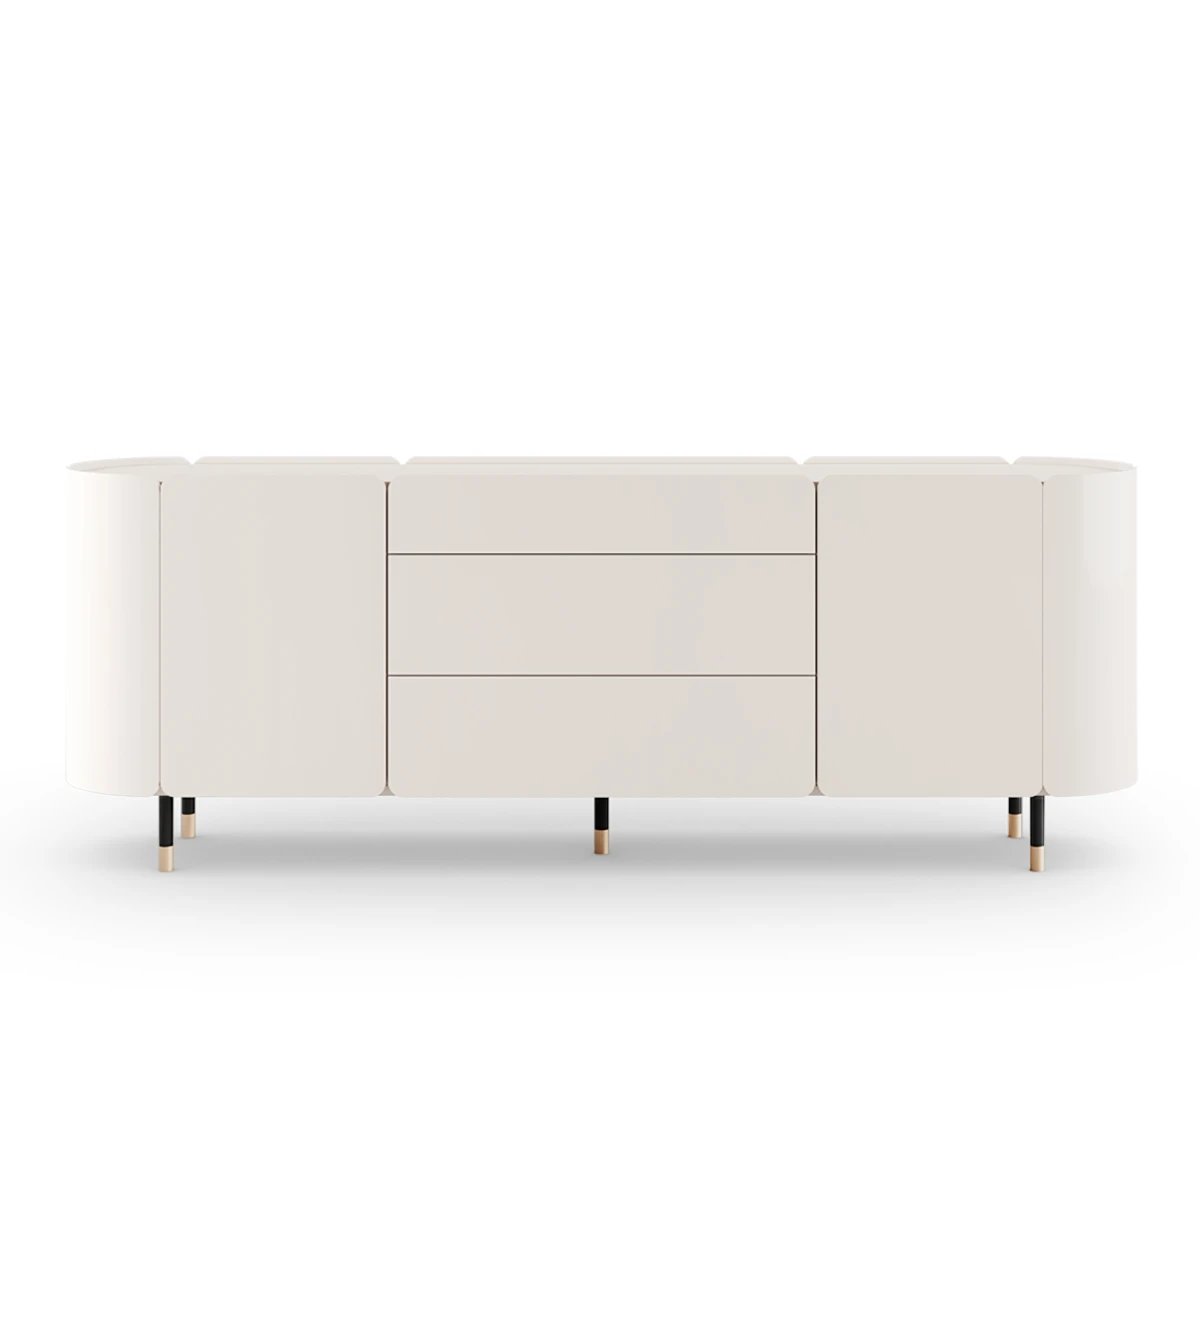 Sideboard with 2 doors and 3 drawers in pearl lacquer, interior glass shelves, black lacquered legs with gold detail.